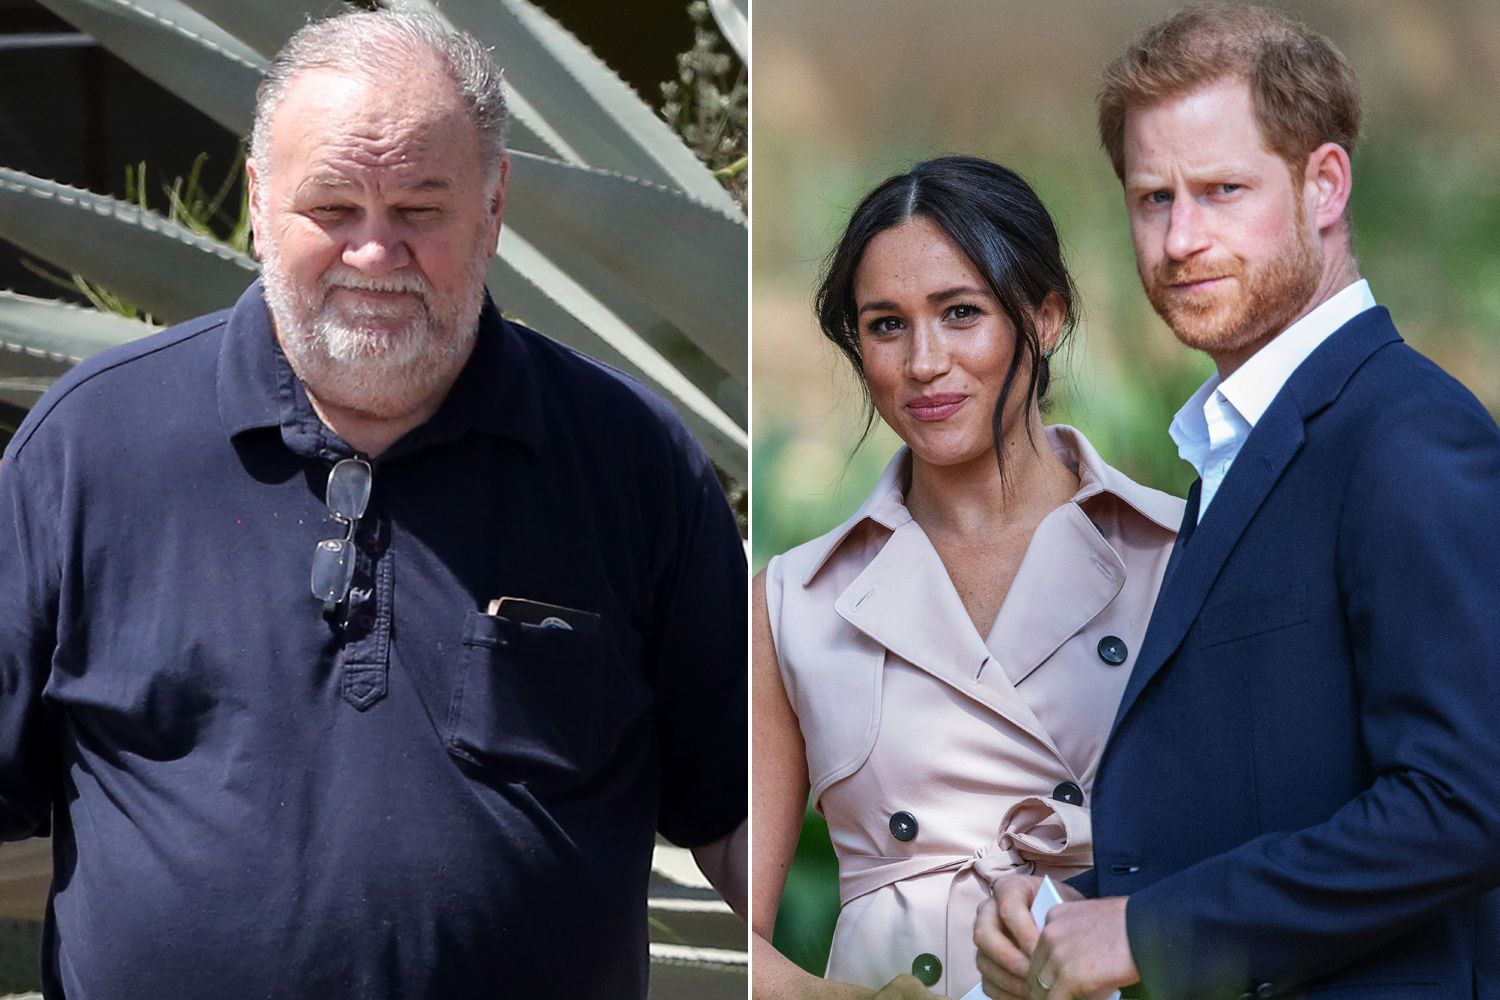 Meghan Markle has had a very negative relationship with her father, but has her relationship improved with her parents since leaving the crown?